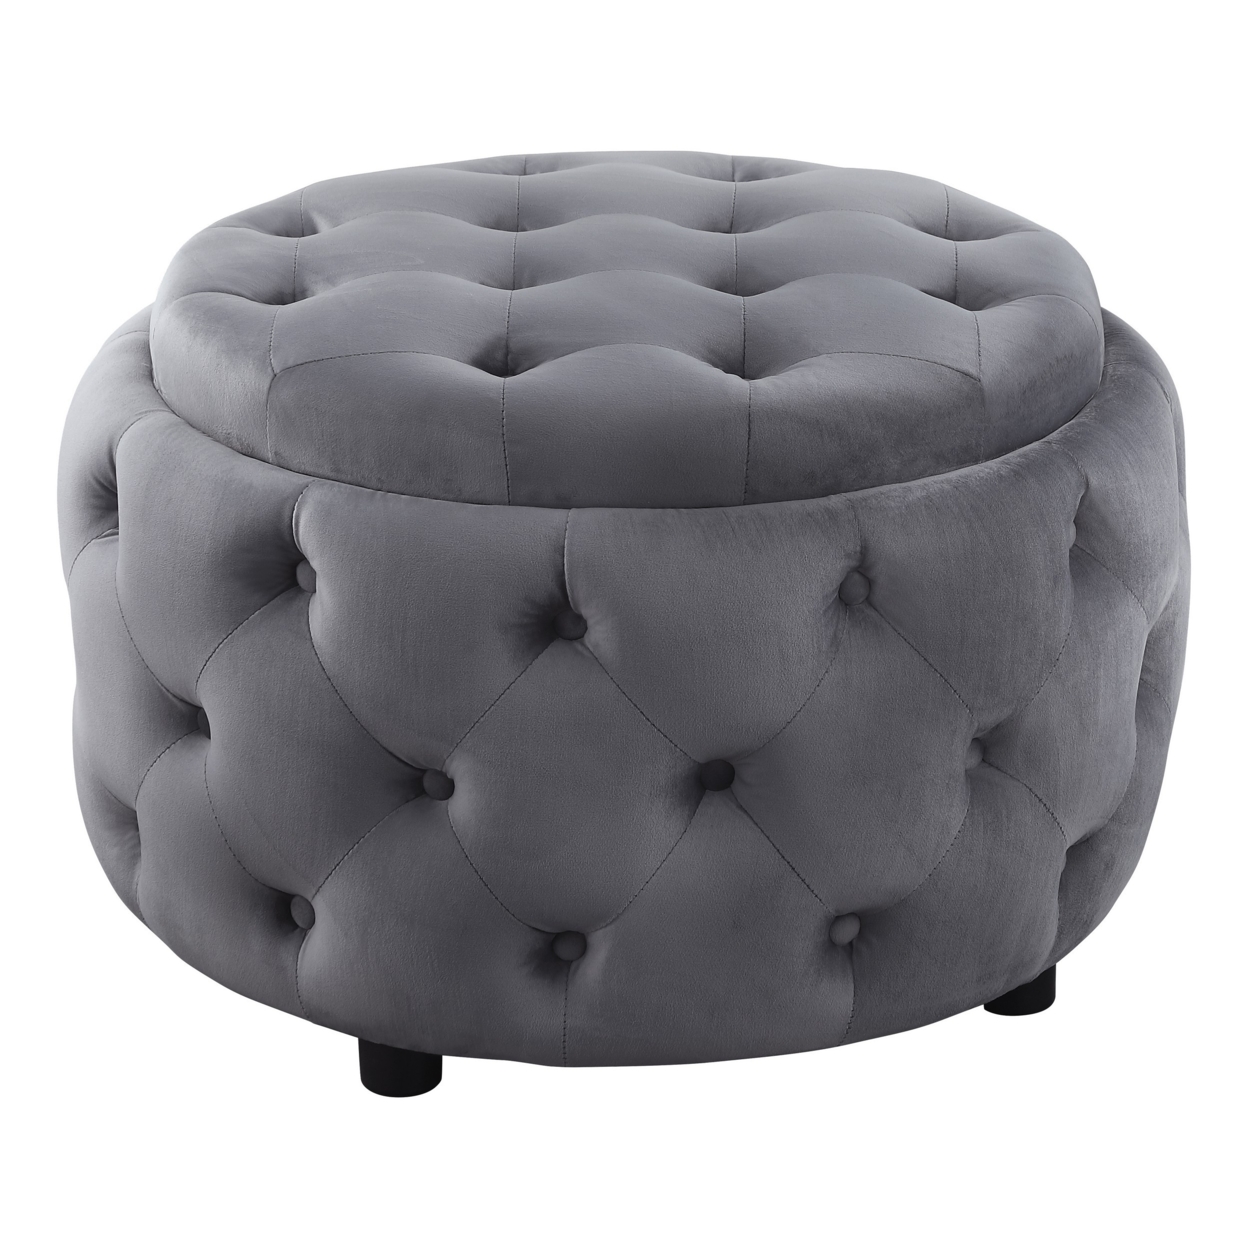 Lina 28 Inch Round Ottoman, Storage Area, Smooth Gray Vegan Faux Leather